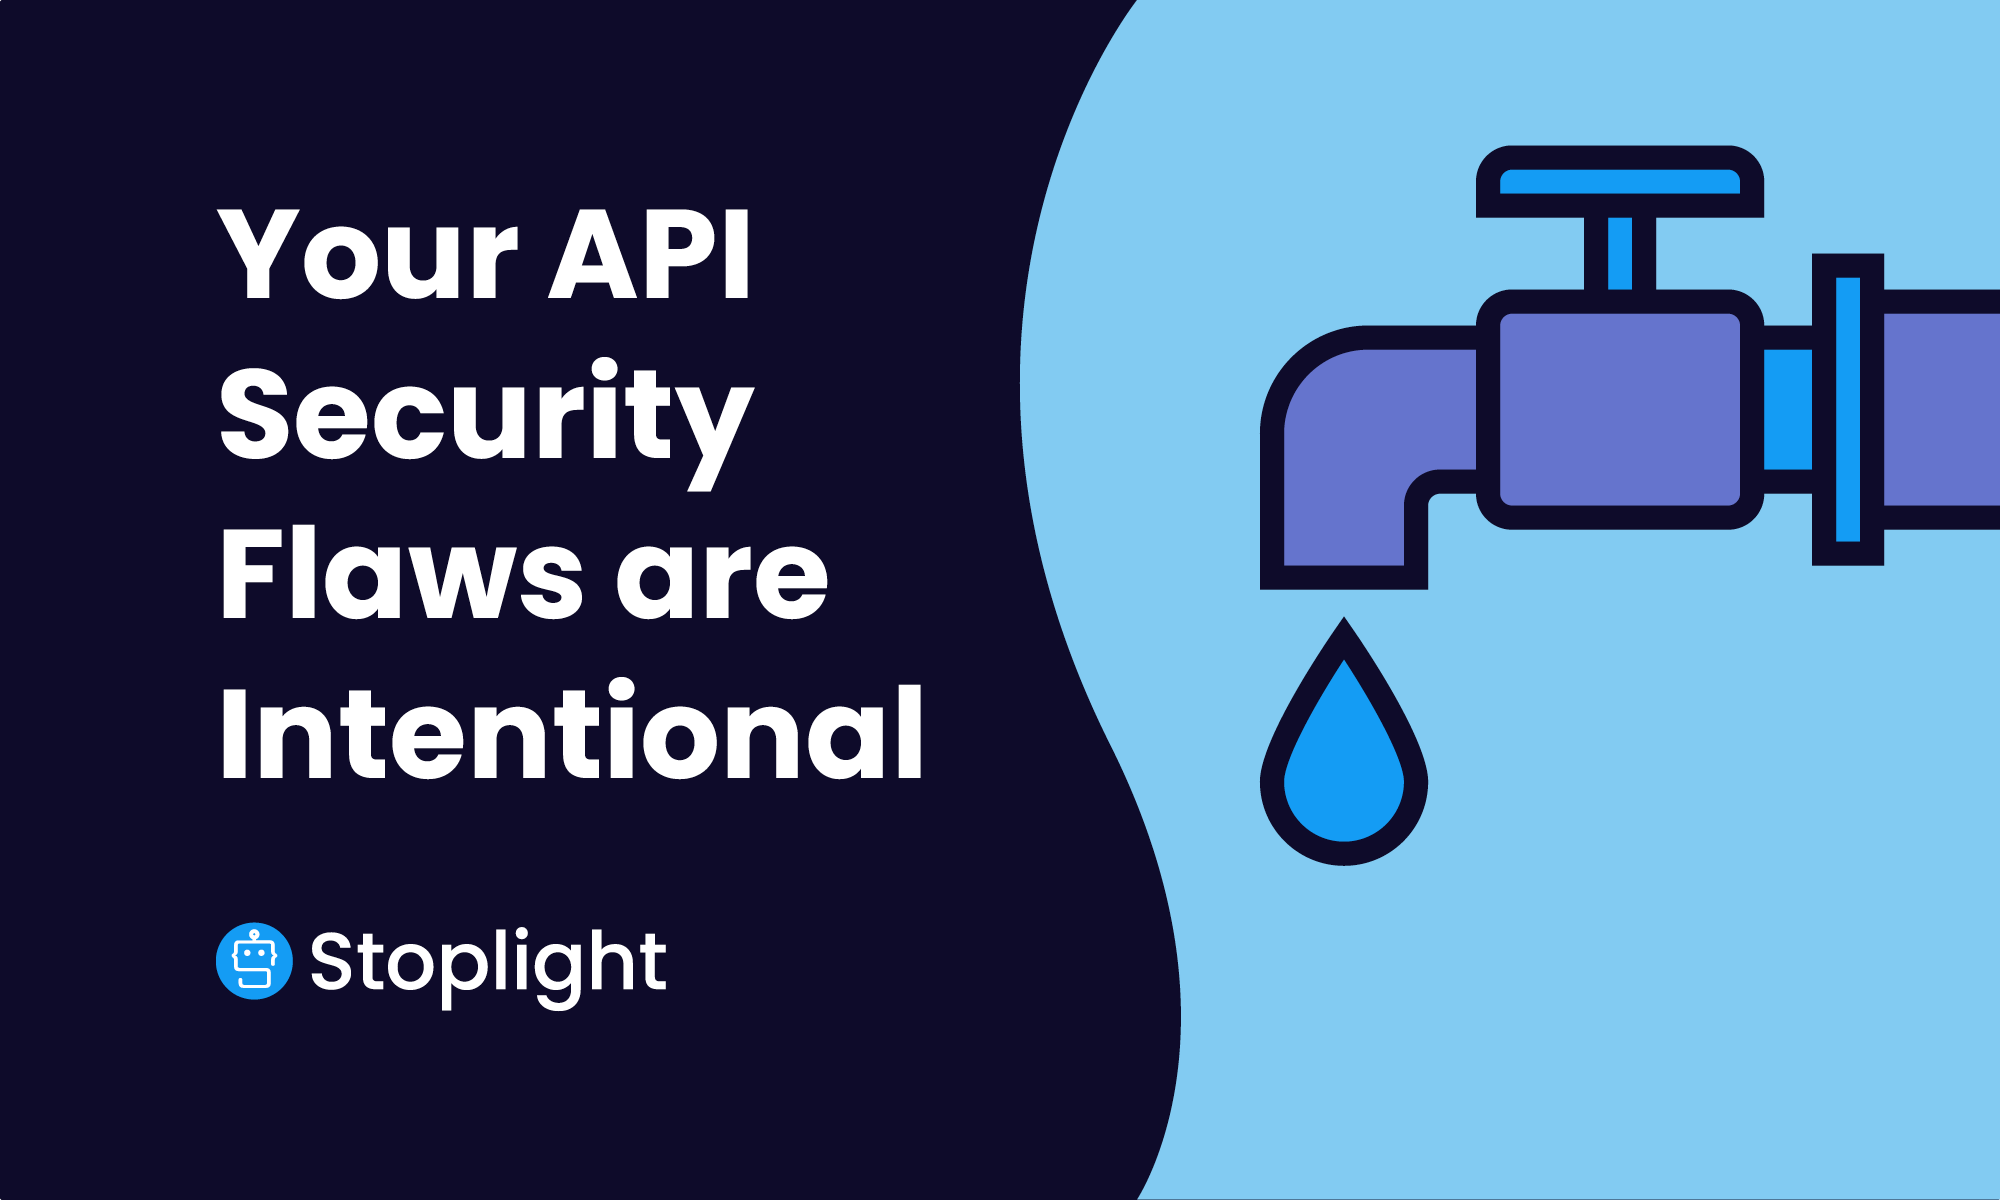 Your API Security Flaws are Intentional